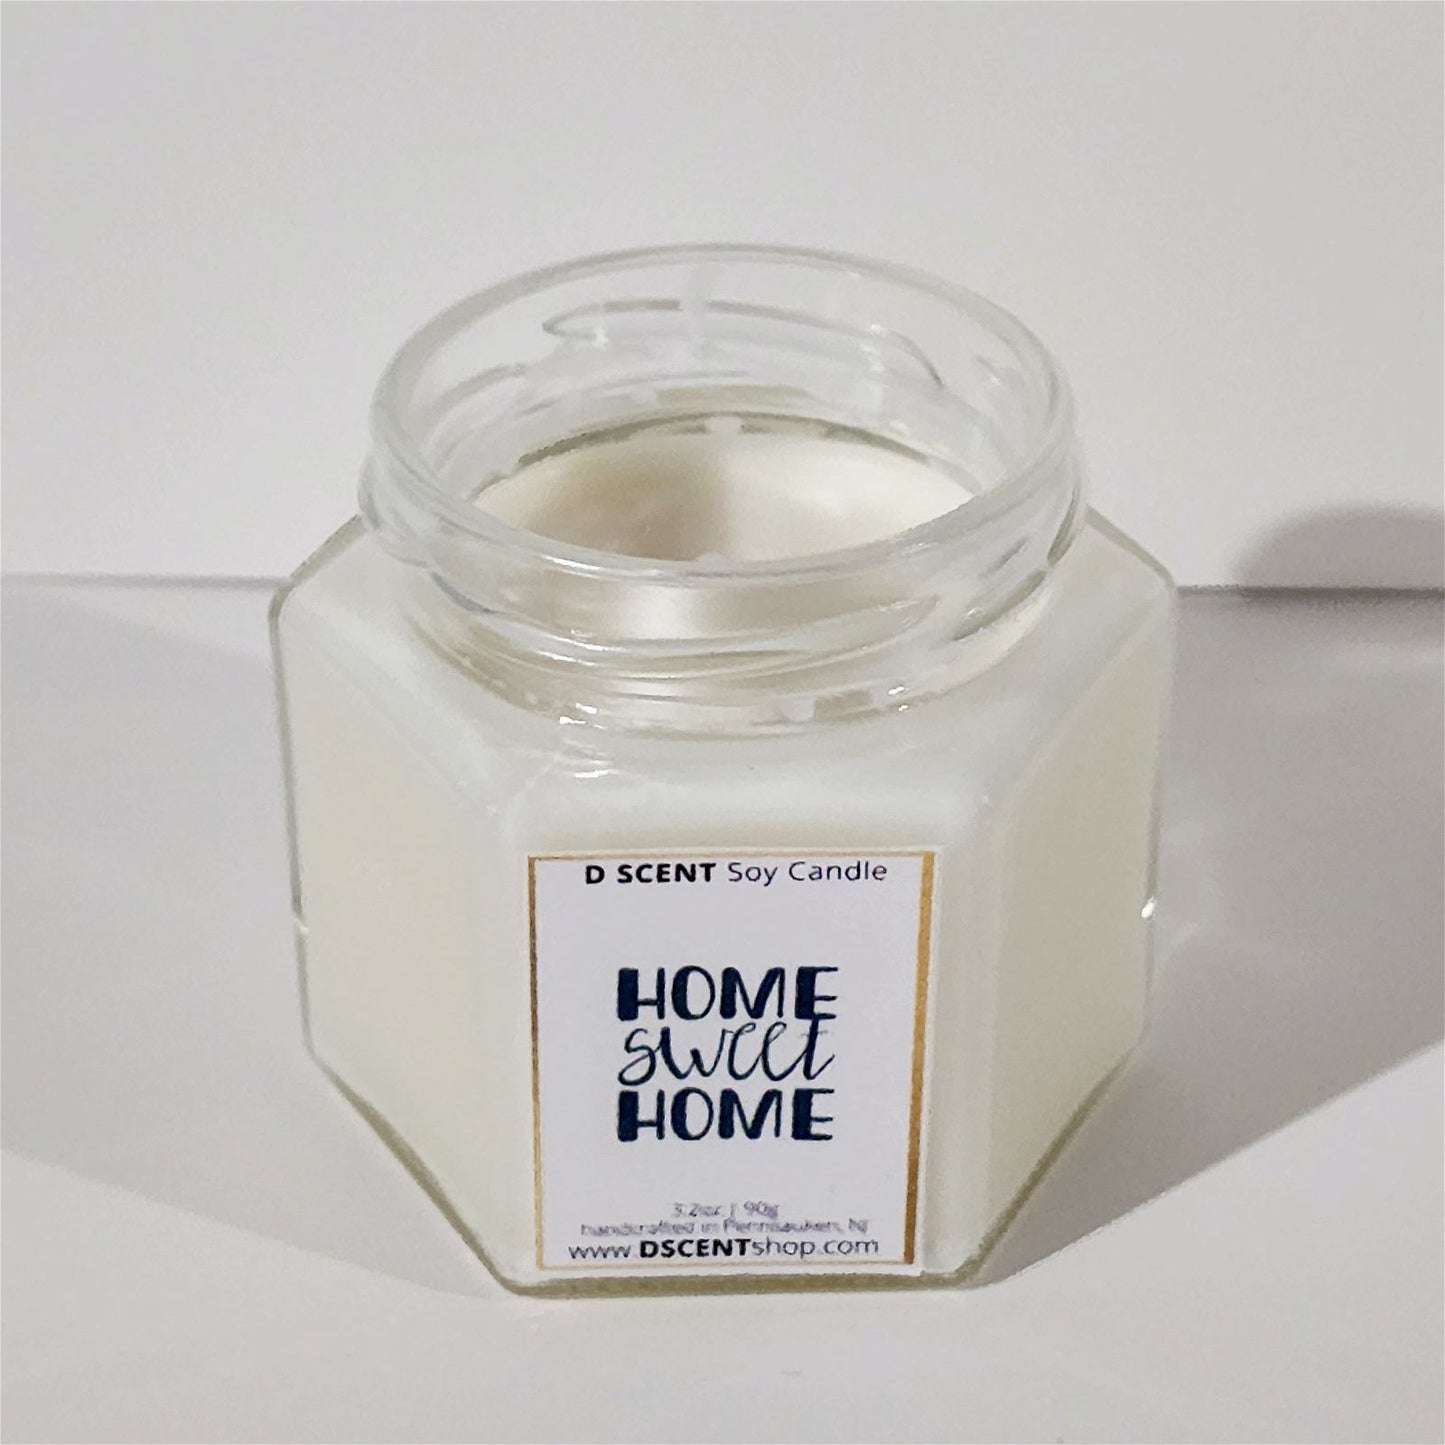 HOME sweet HOME Soy Candle | Small Hex Jar - D SCENT 